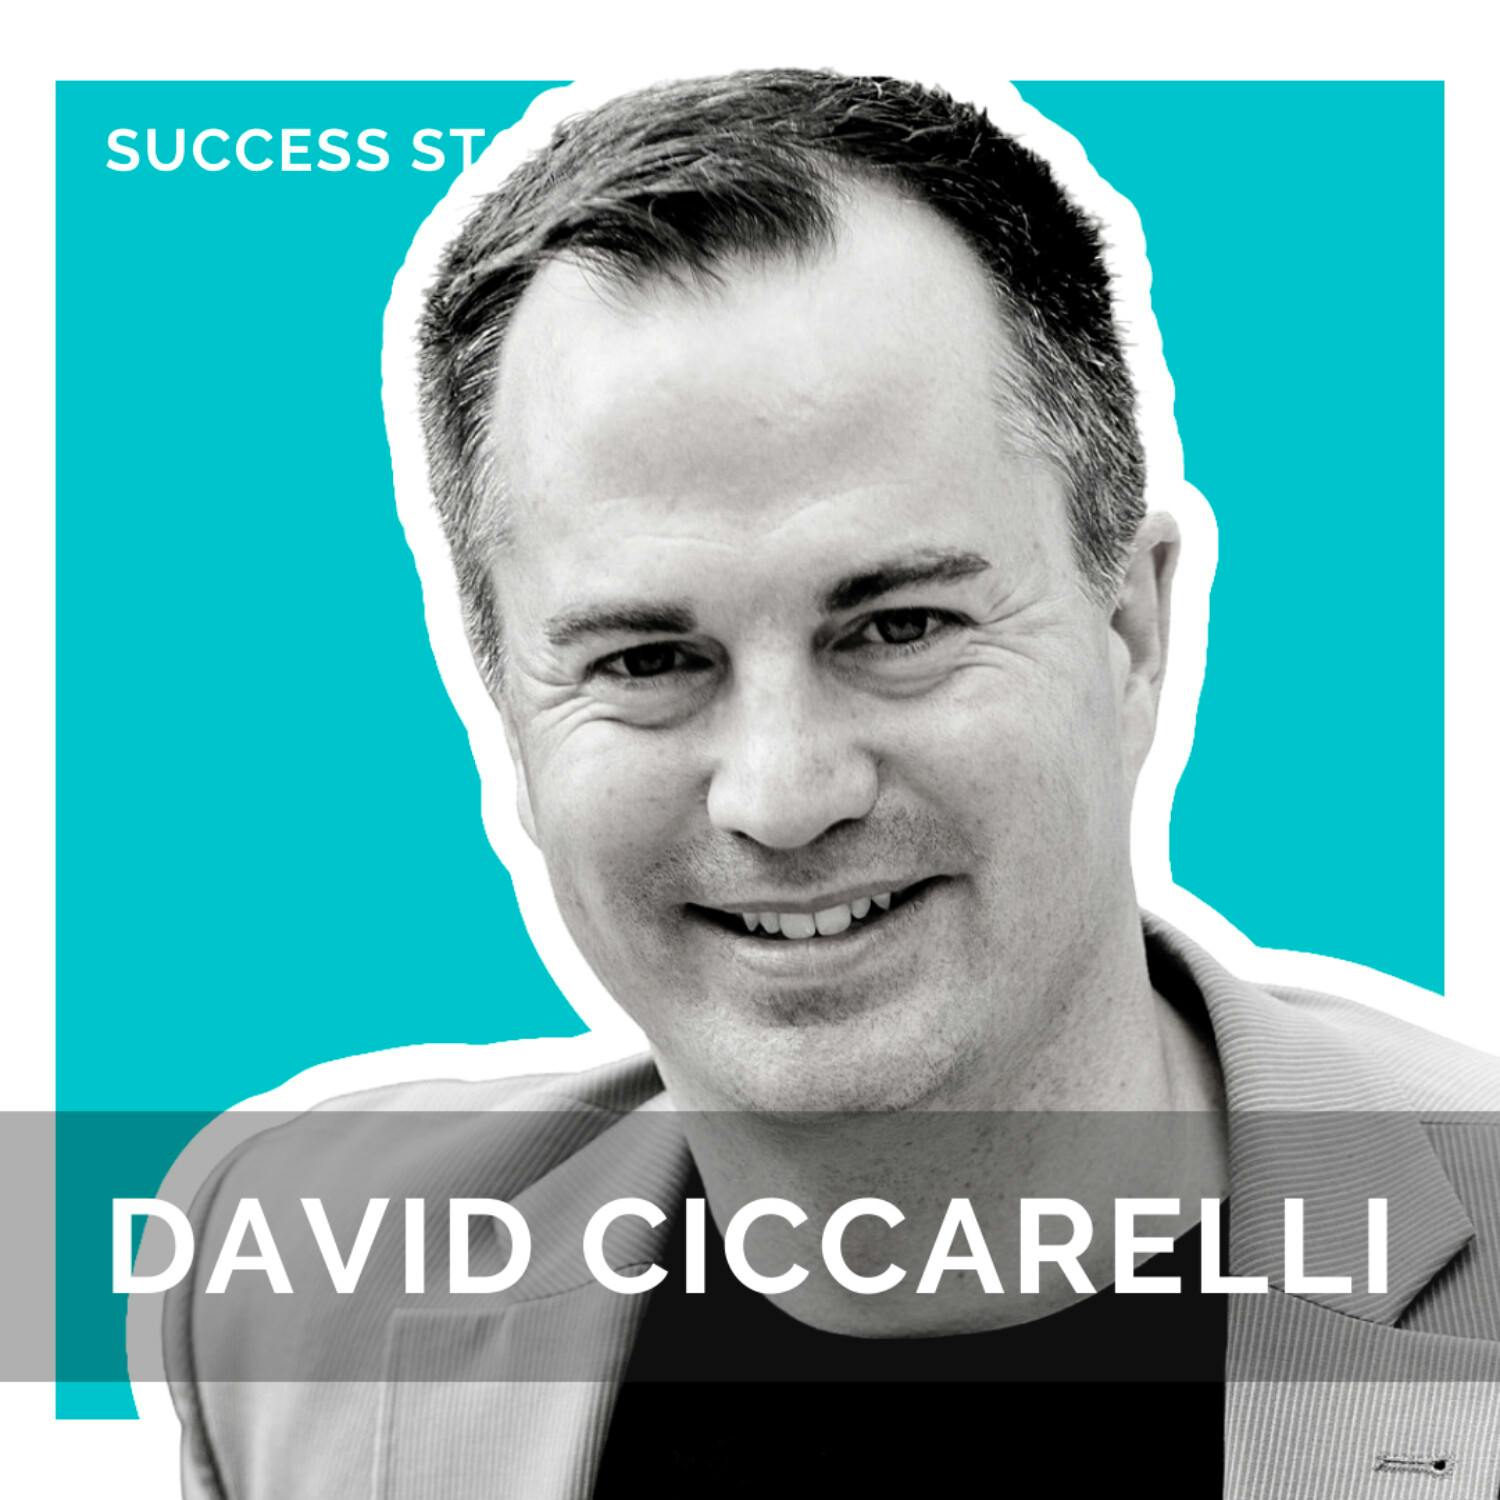 David Ciccarelli, CEO & Founder of Voices.com | How to Build a Two-Sided Marketplace From Scratch